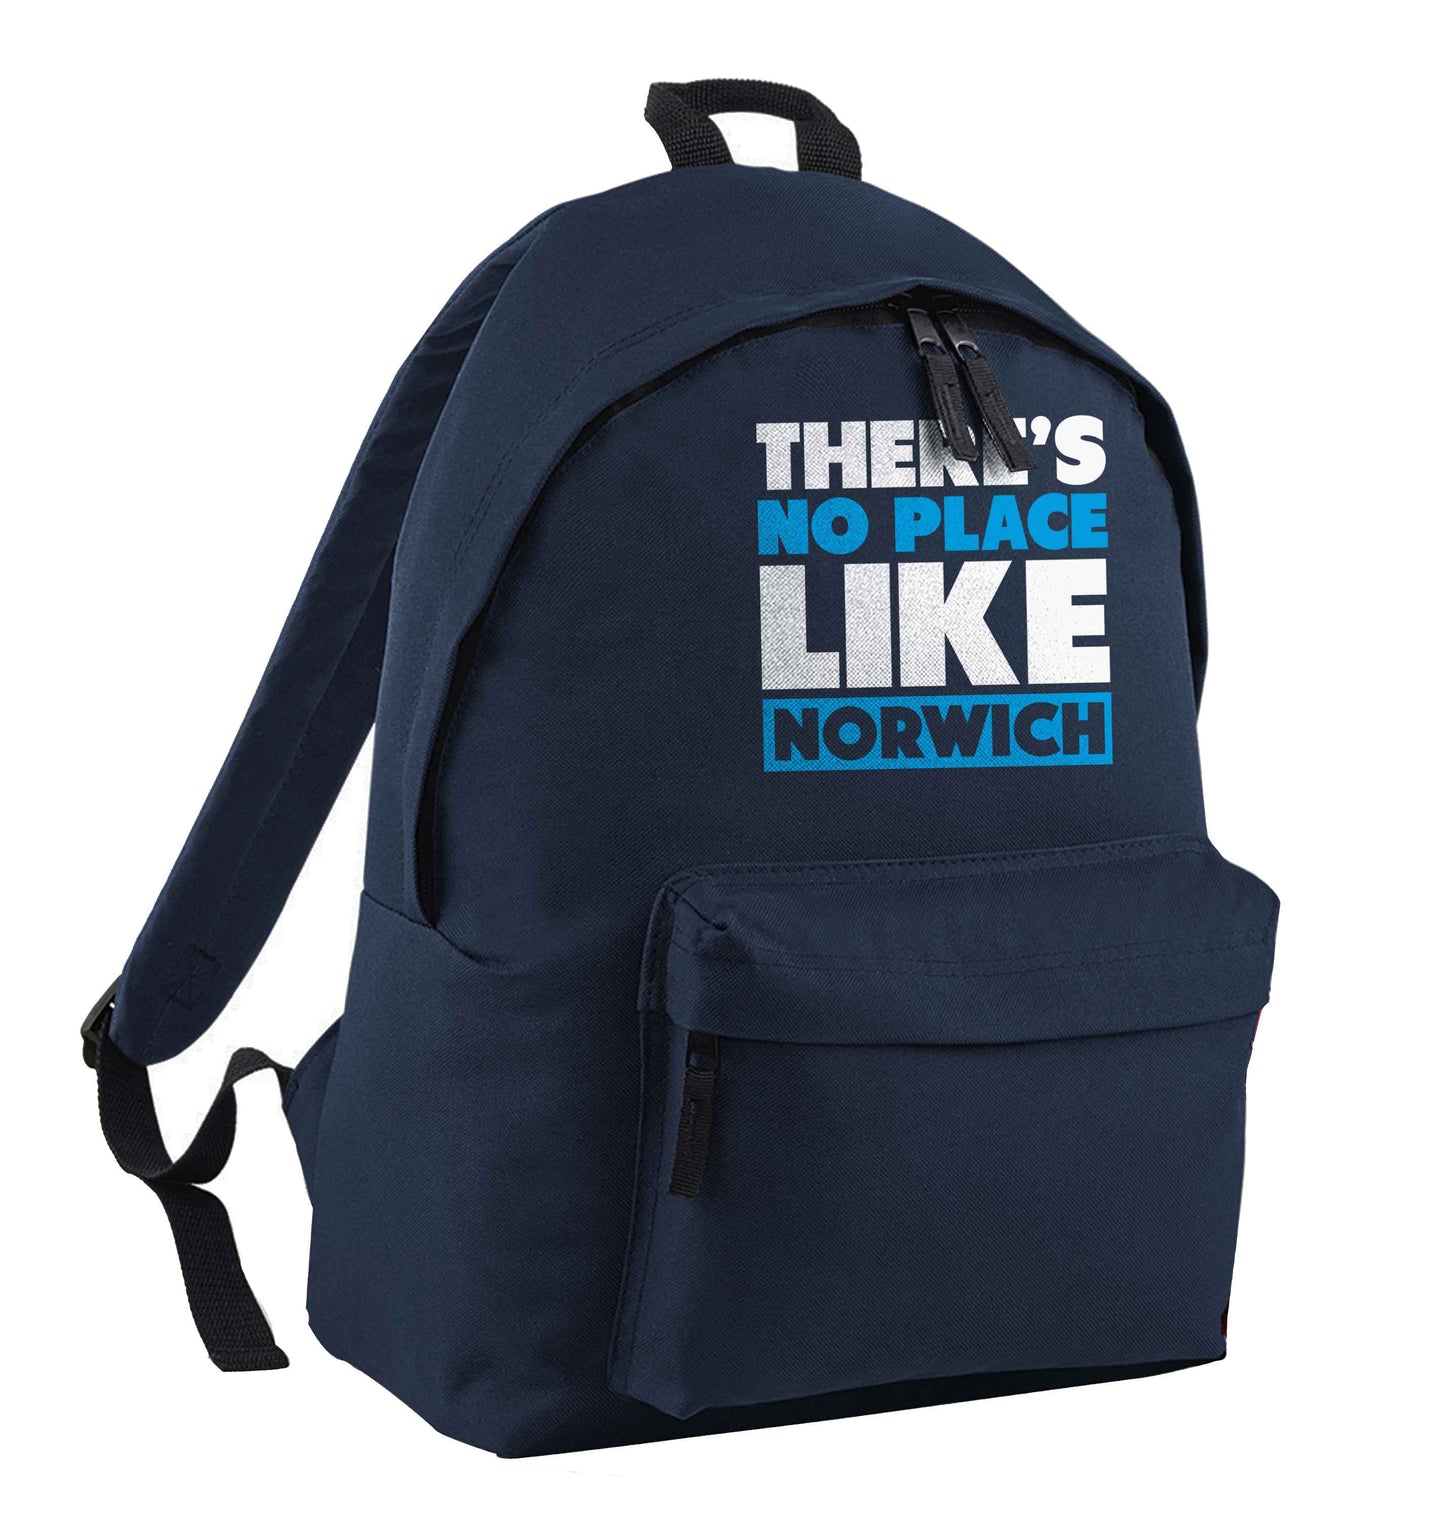 There's no place like Norwich navy children's backpack